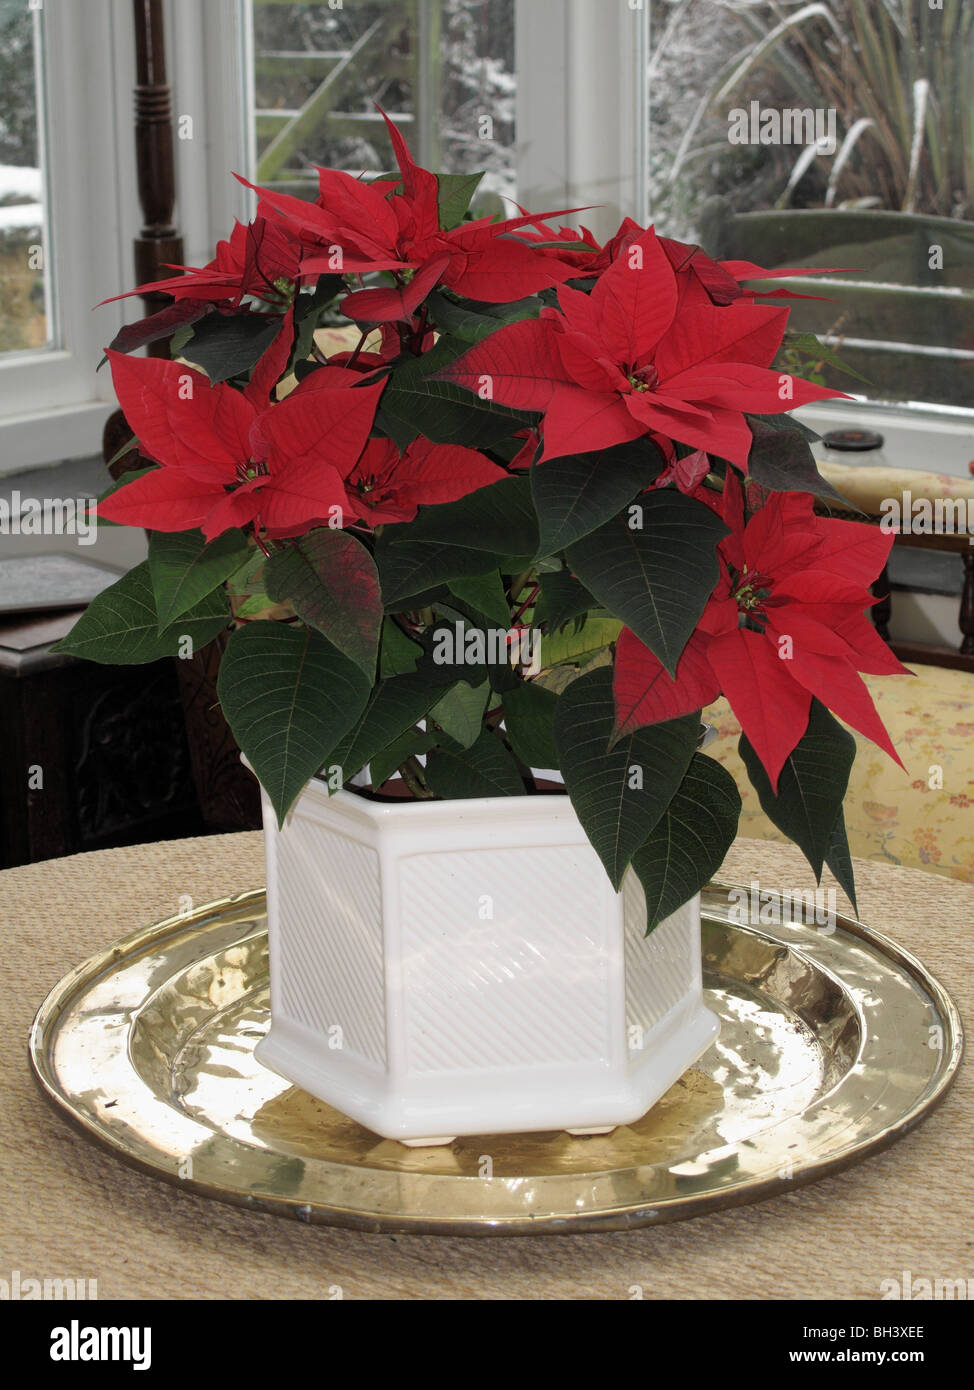 Poinsettia plant with red coloured bracts in household setting Stock Photo